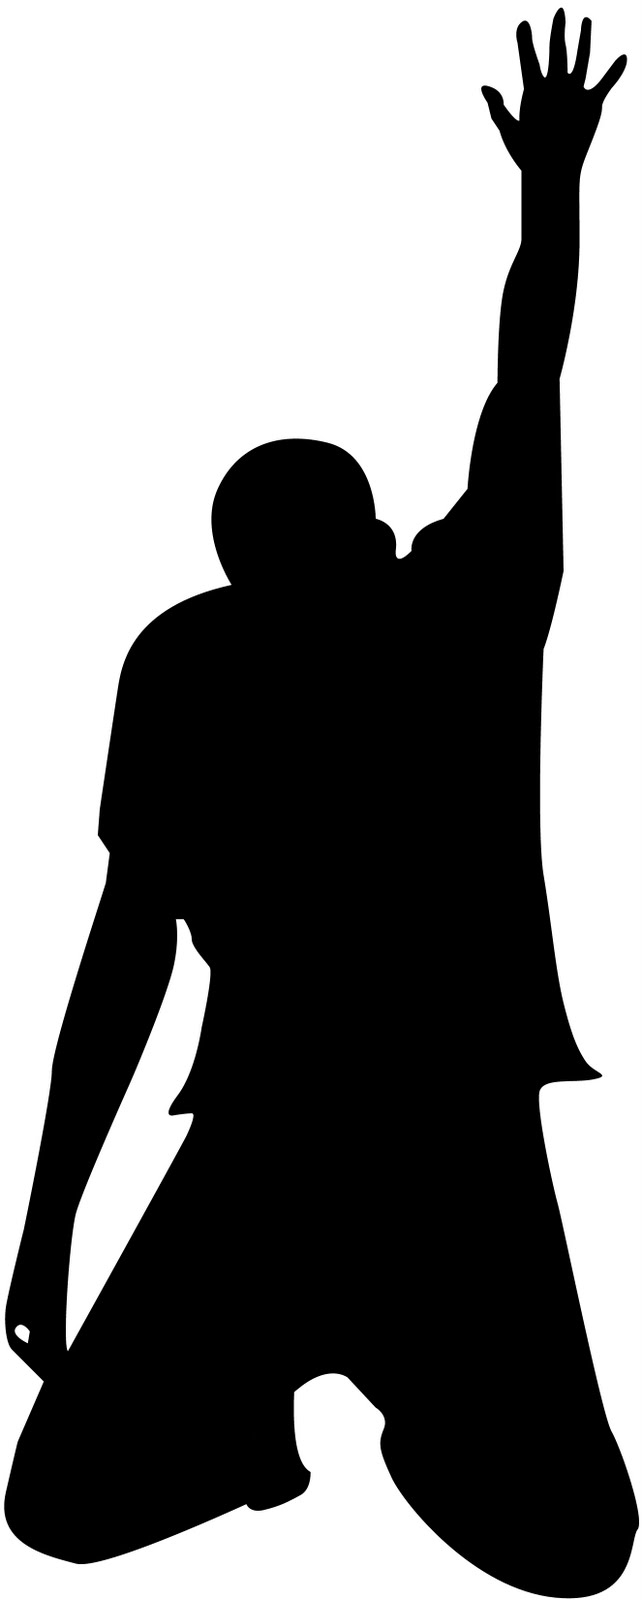 Images For > Praying Silhouette Png